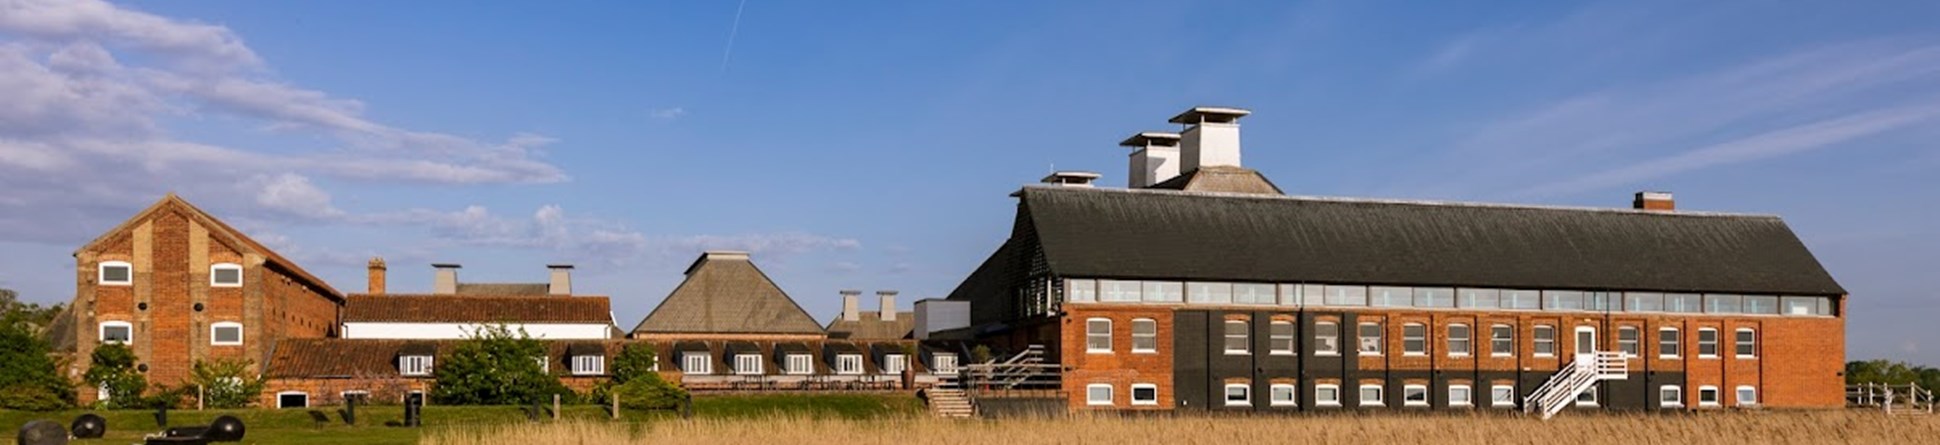 Through wheat fields, in the distance are a collection of red brick buildings, with a large long building to the right, small buildings in the centre and the front of a long building to the left.